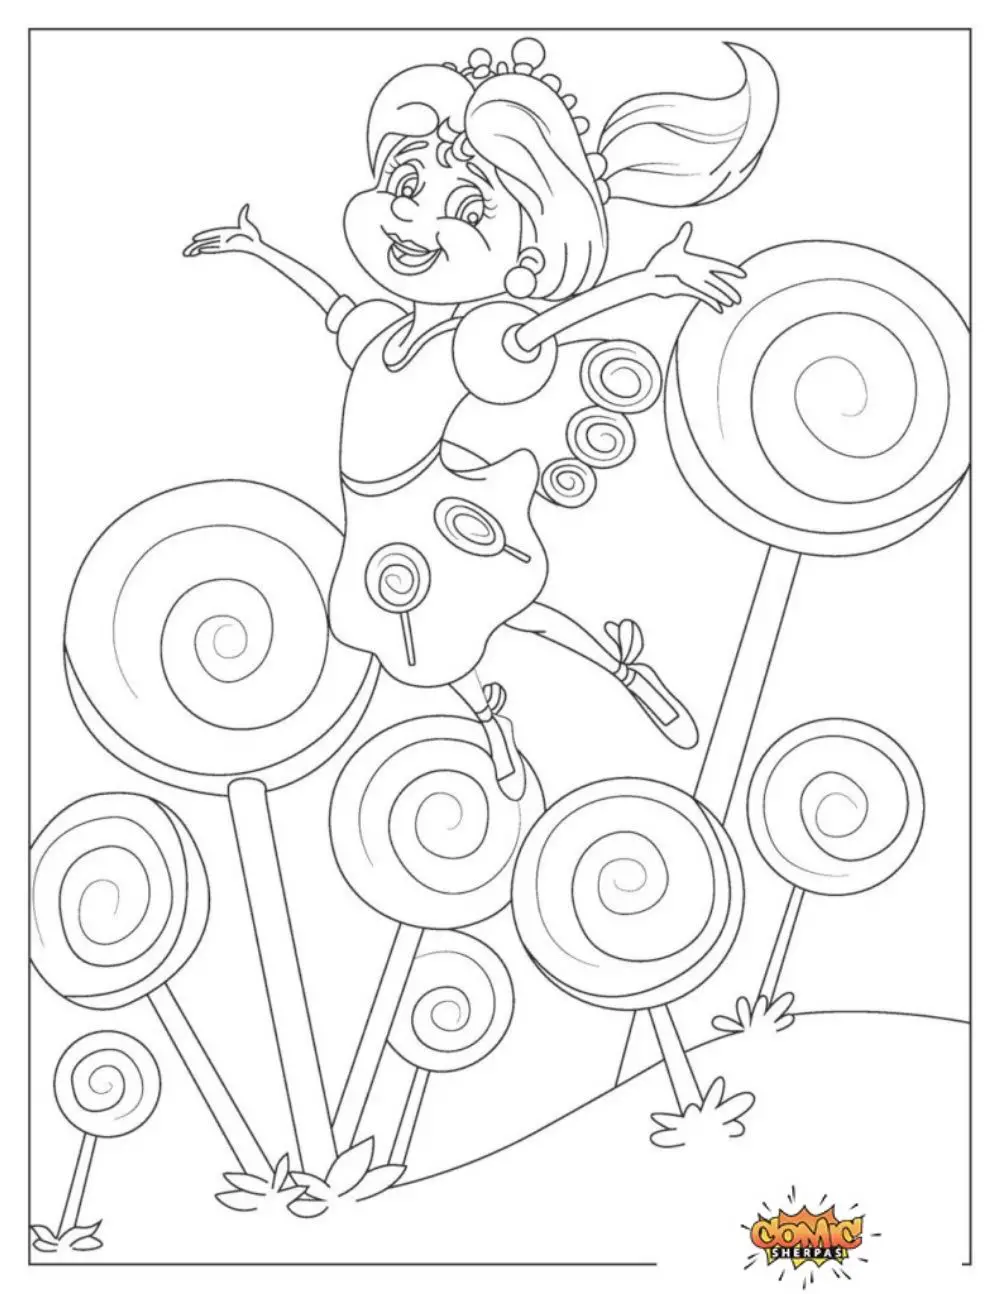 candyland board coloring pages